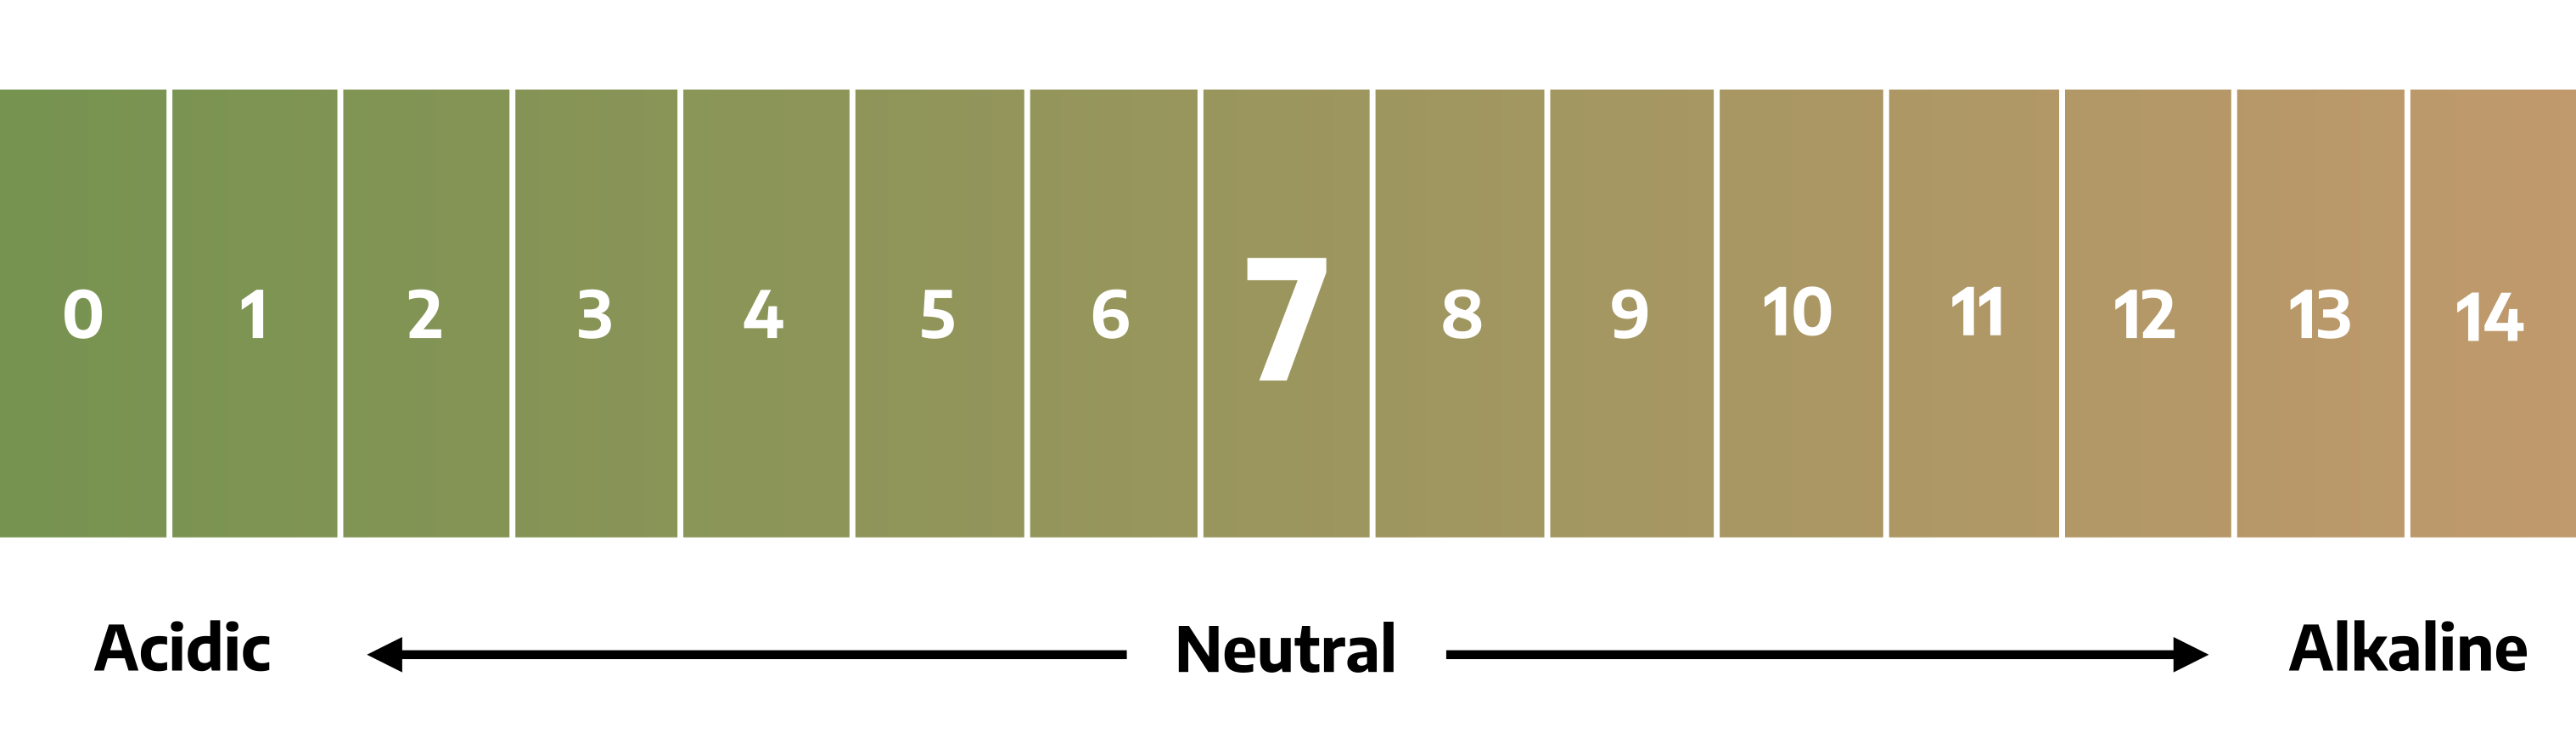 A number diagram ranging from 0 to 14 representing the pH scale. The 0 is shaded a green and slowly transitions to a green/red at 14. The 7 is larger indicating the neutral number. 0-6 are marked as Acidic, 7 is marked as neutral, and 8-14 is marked as alkaline.